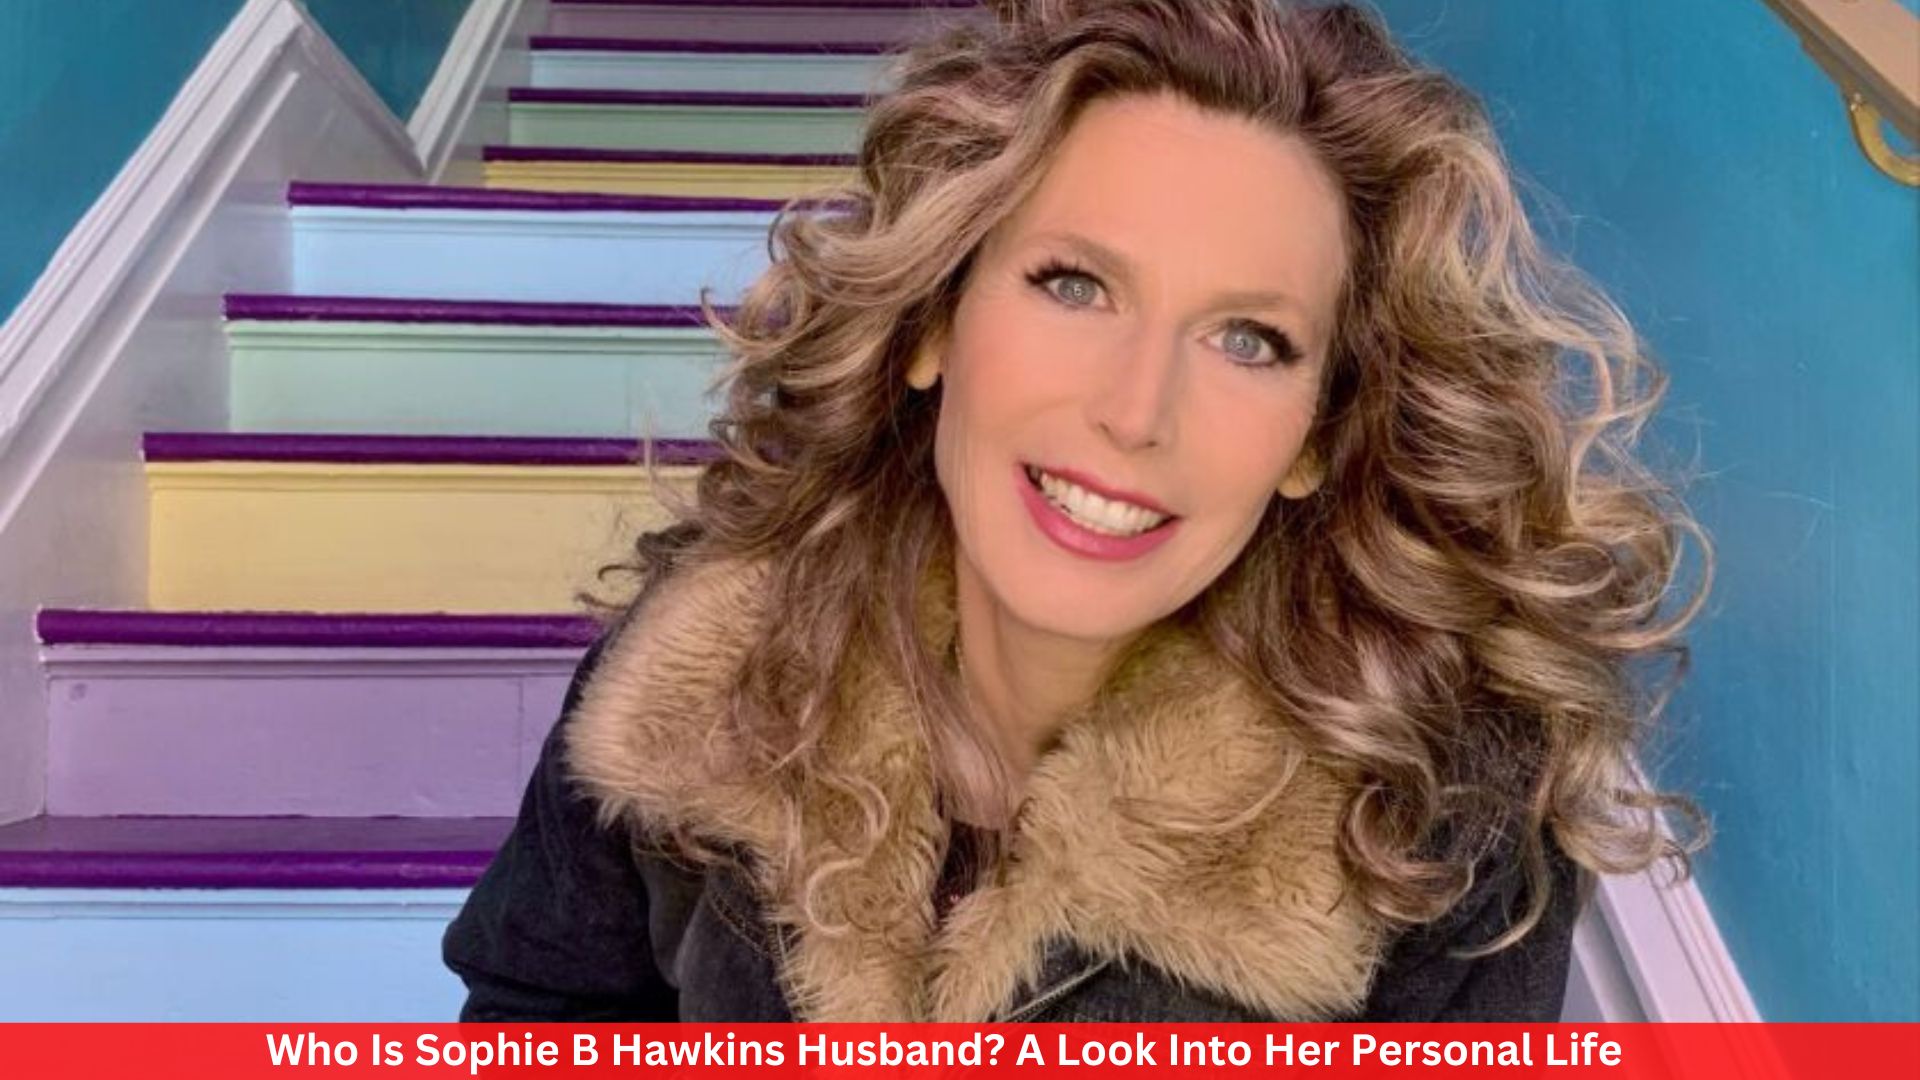 Who Is Sophie B Hawkins Husband? A Look Into Her Personal Life